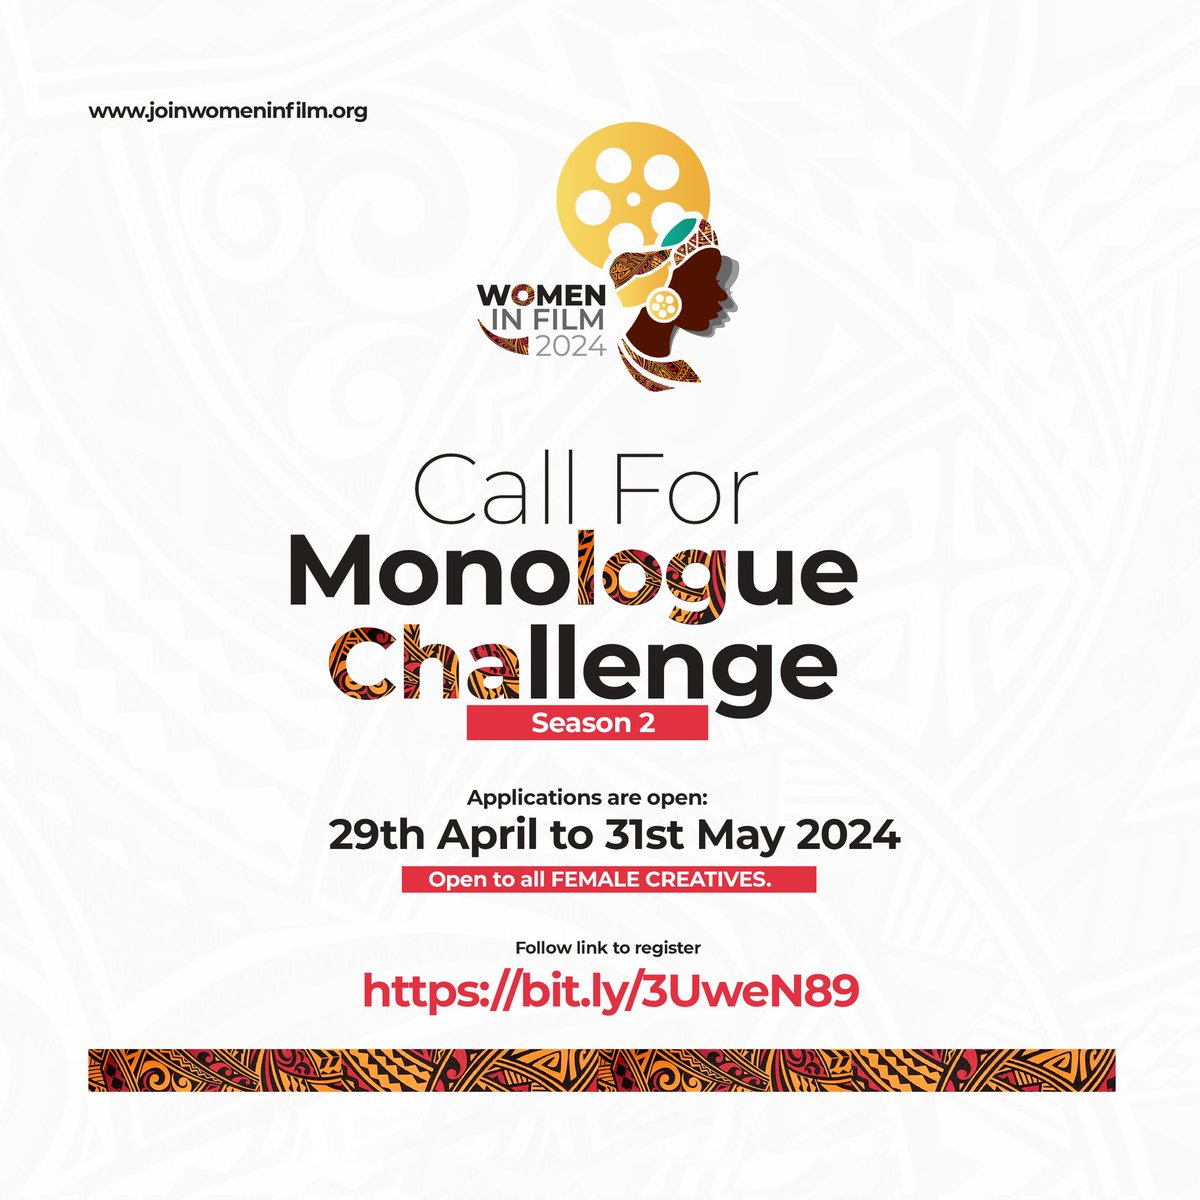 The challenge is back. Bigger and better.

📌 Stand a chance to win over 5M in cash prize as a start up capital. 

📌 Fully paid scholarship in script writing for 8weeks.

And so much more.

Applications are open from 29th April - 31st May 2024.

Follow the link to register:…